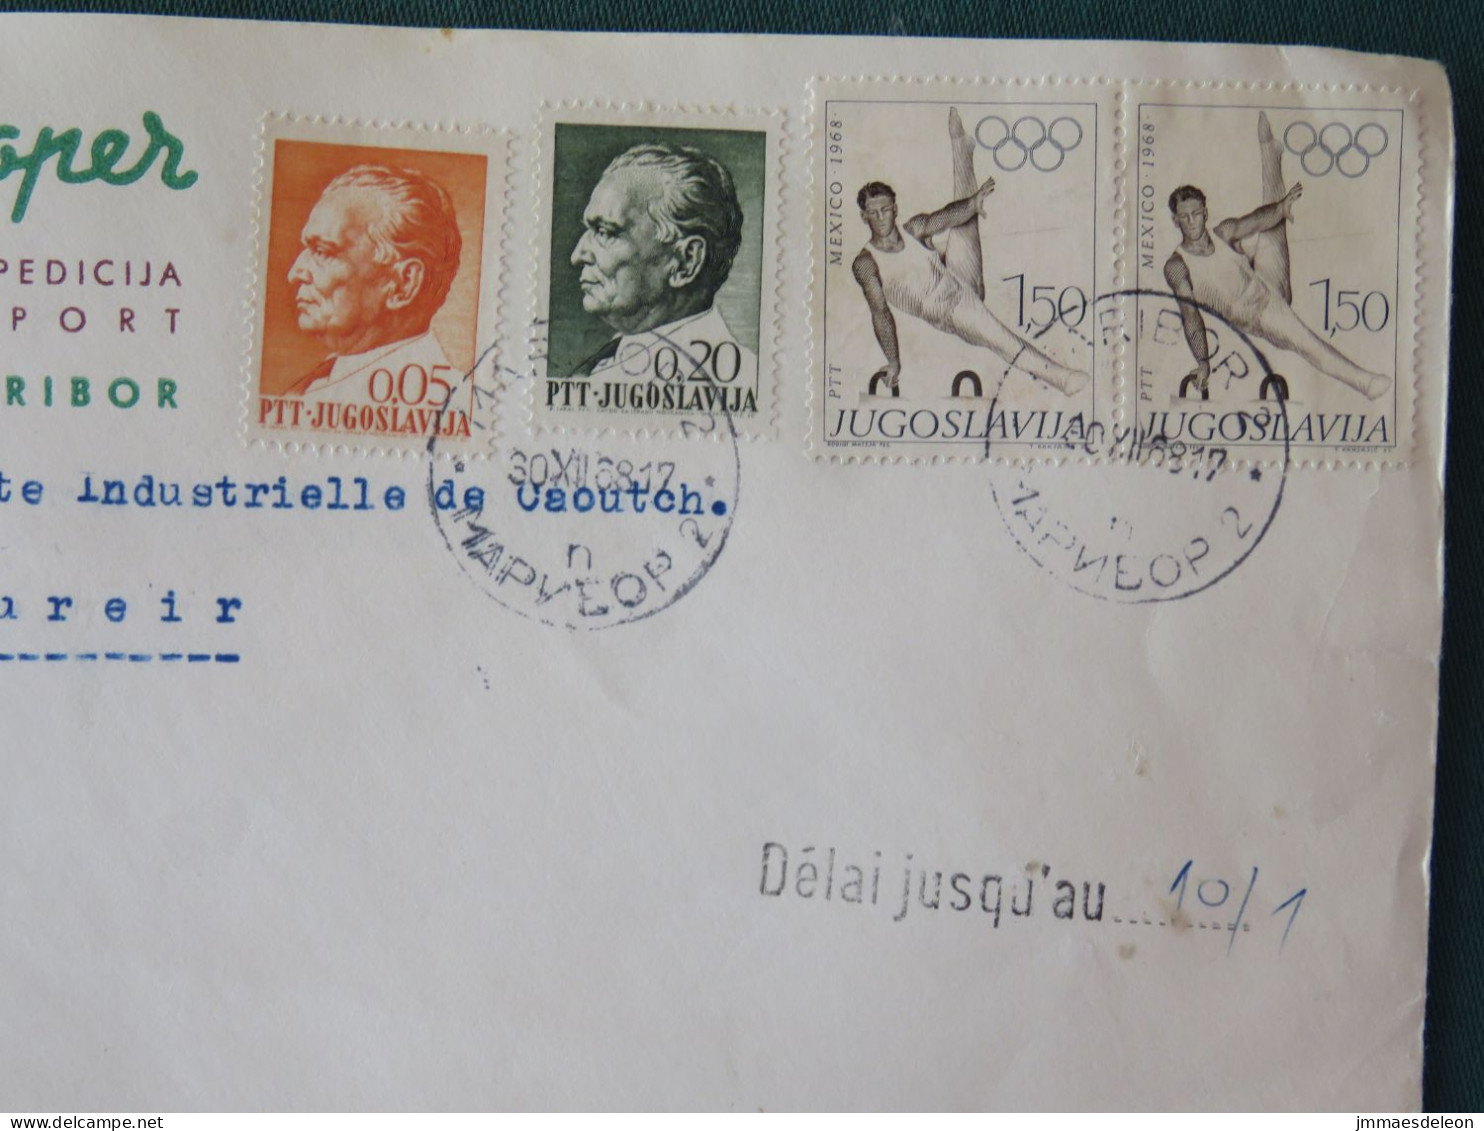 Yugoslavia 1968 Registered Cover To Switzerland - Olympic Games - Gymnastics - Covers & Documents